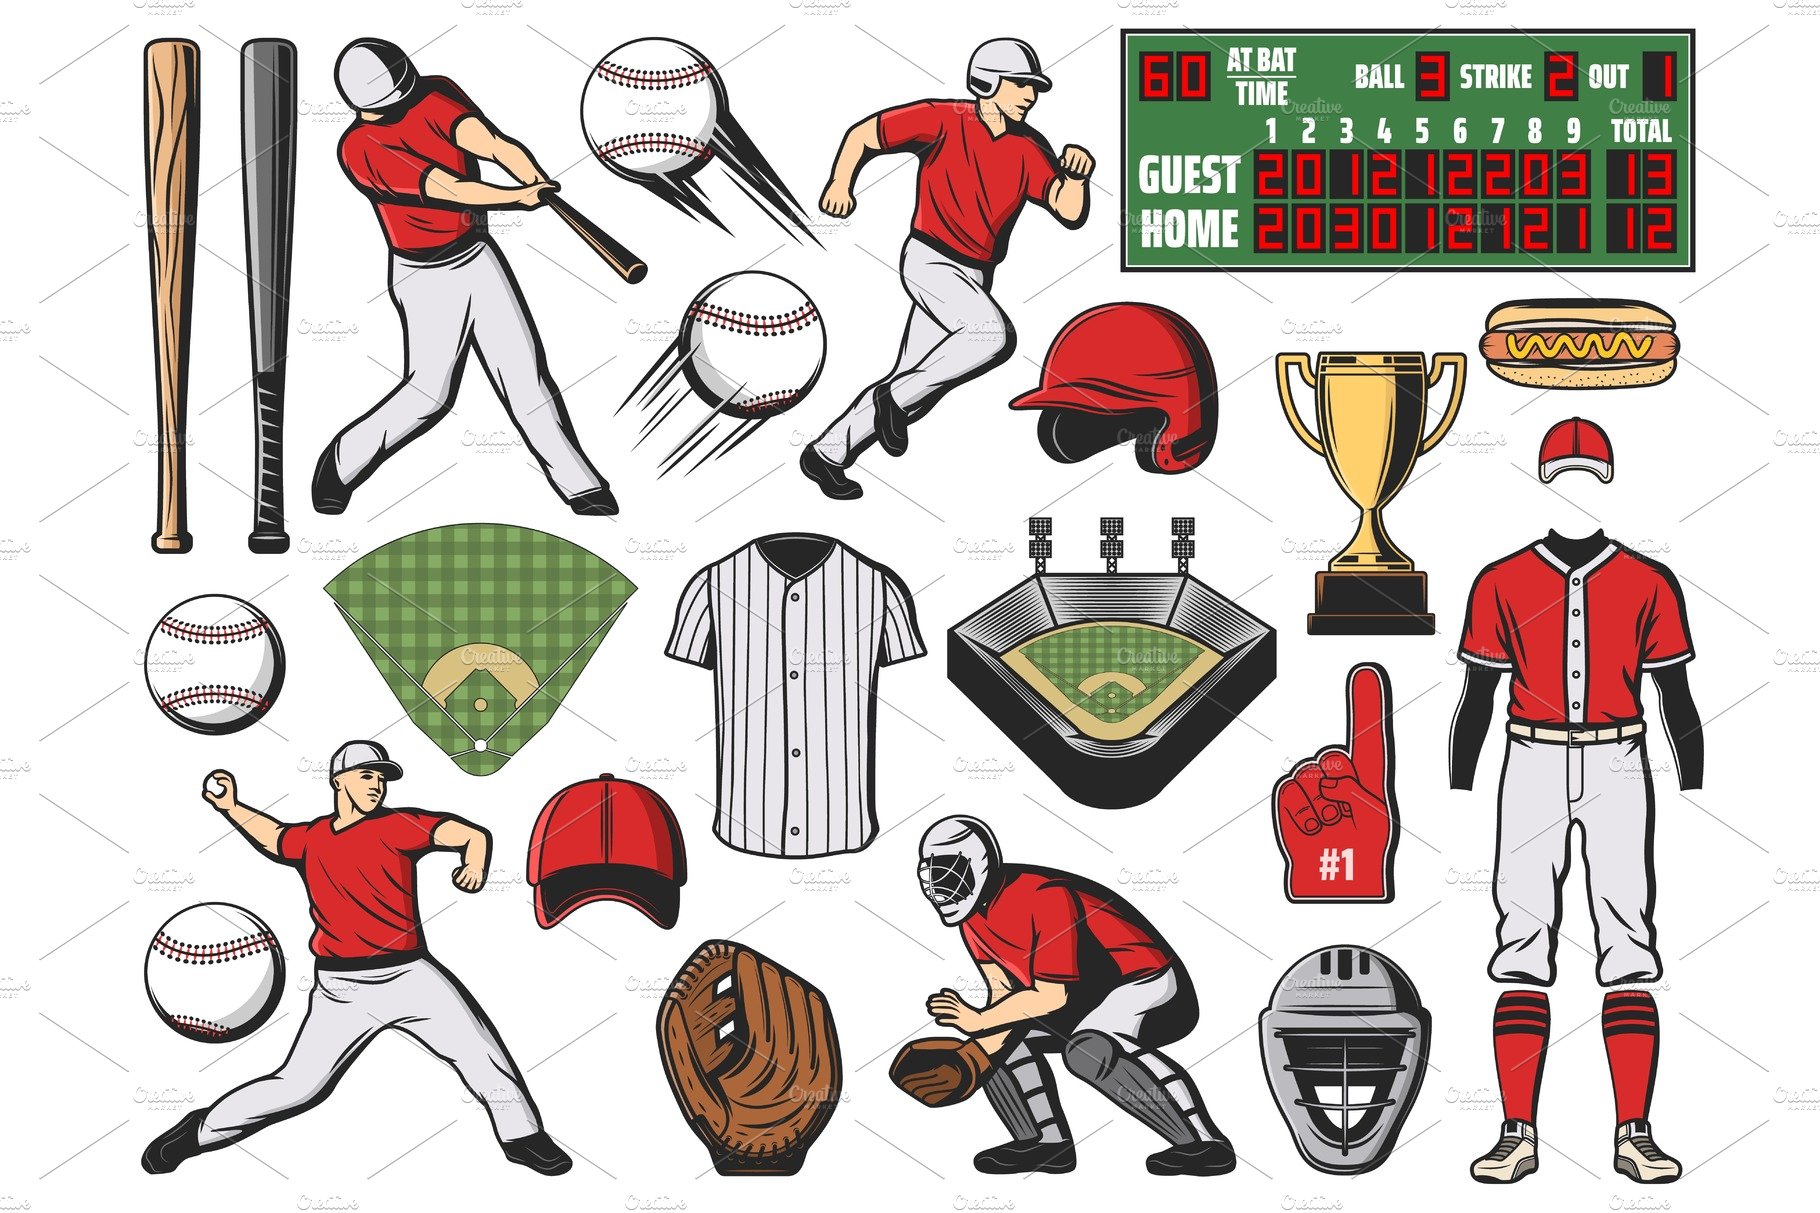 Colorful elements for baseball illustrations.